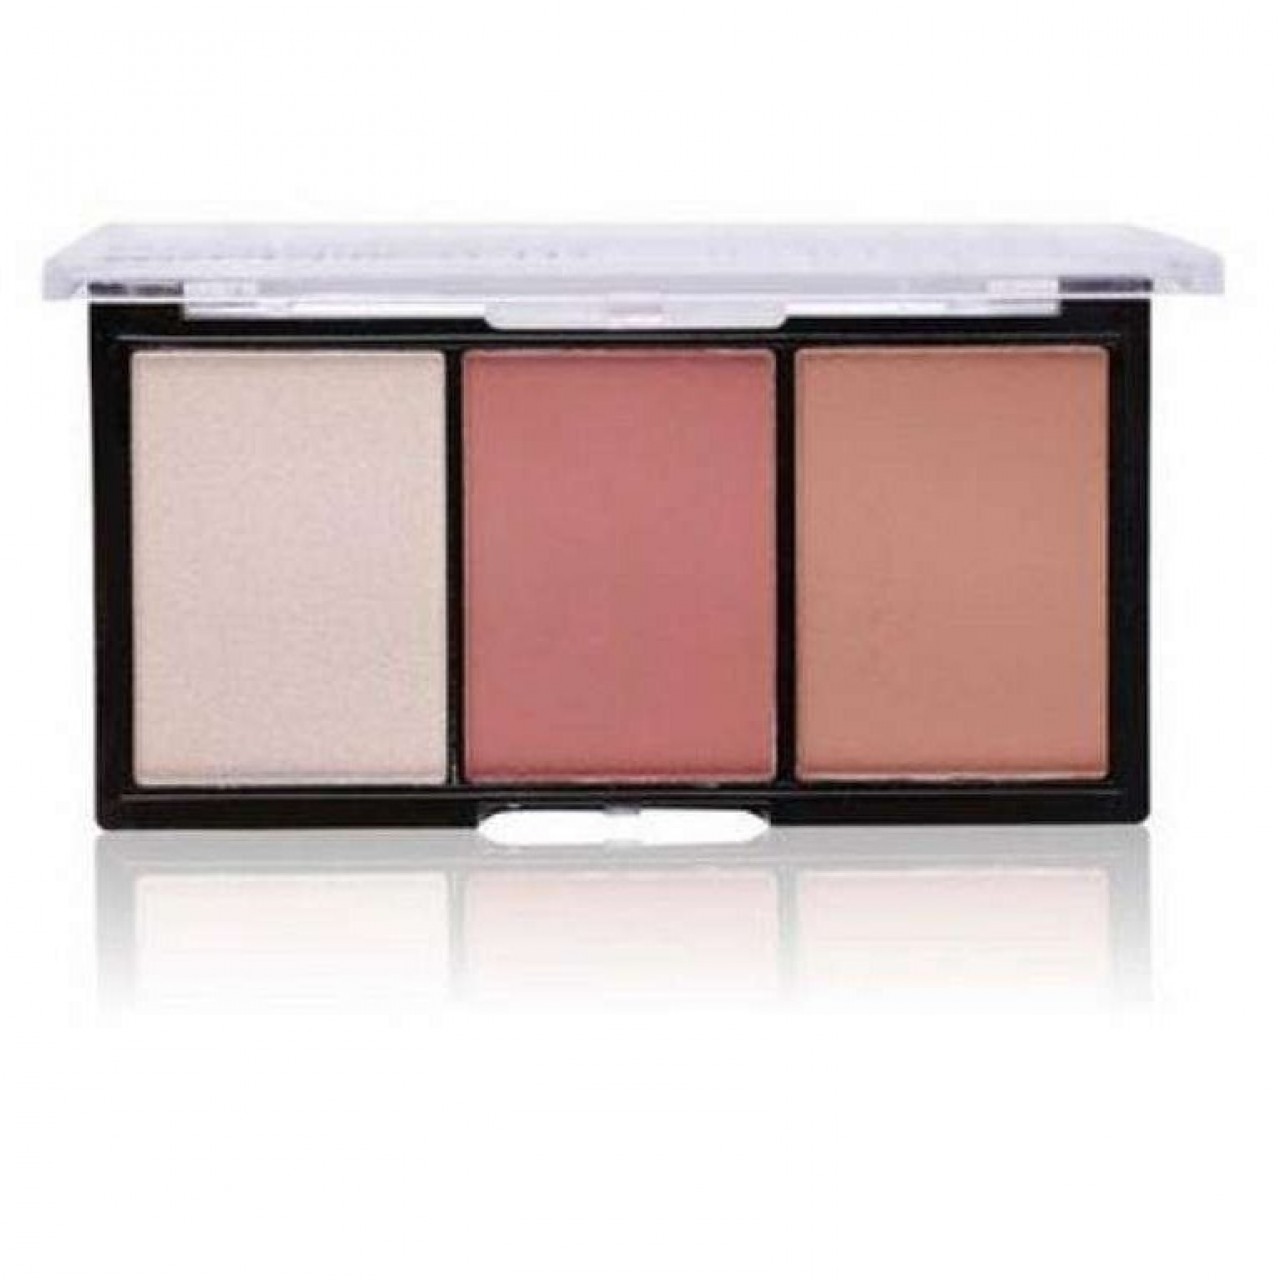 3 Shades Blusher - Multicolor